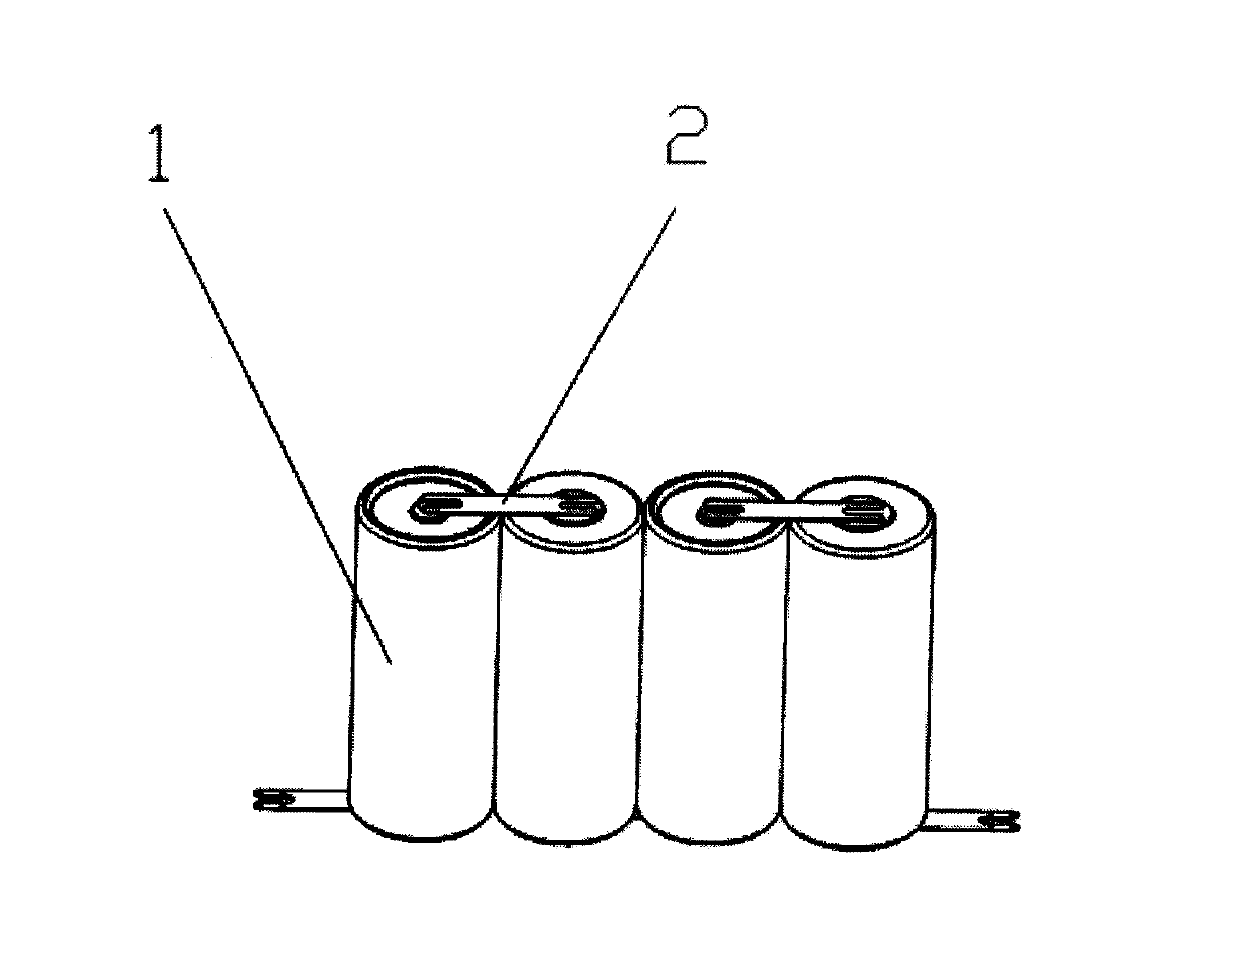 Multi-serial and multi-parallel cylindrical lithium ion battery combination body